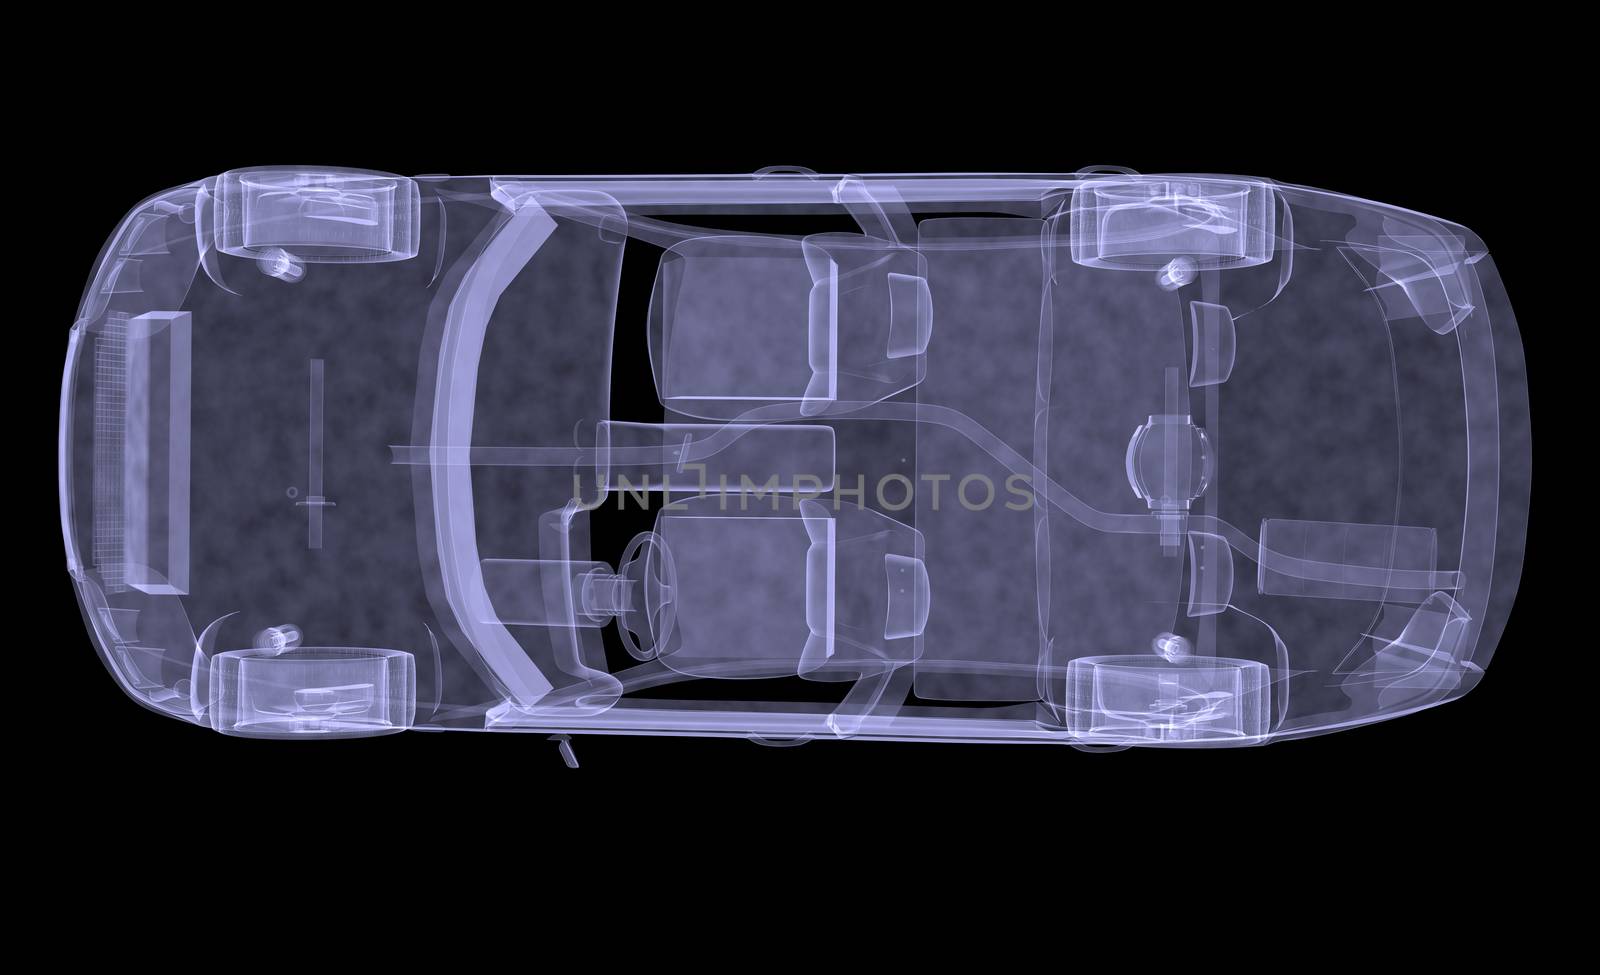 Xray of modern car picture, top view